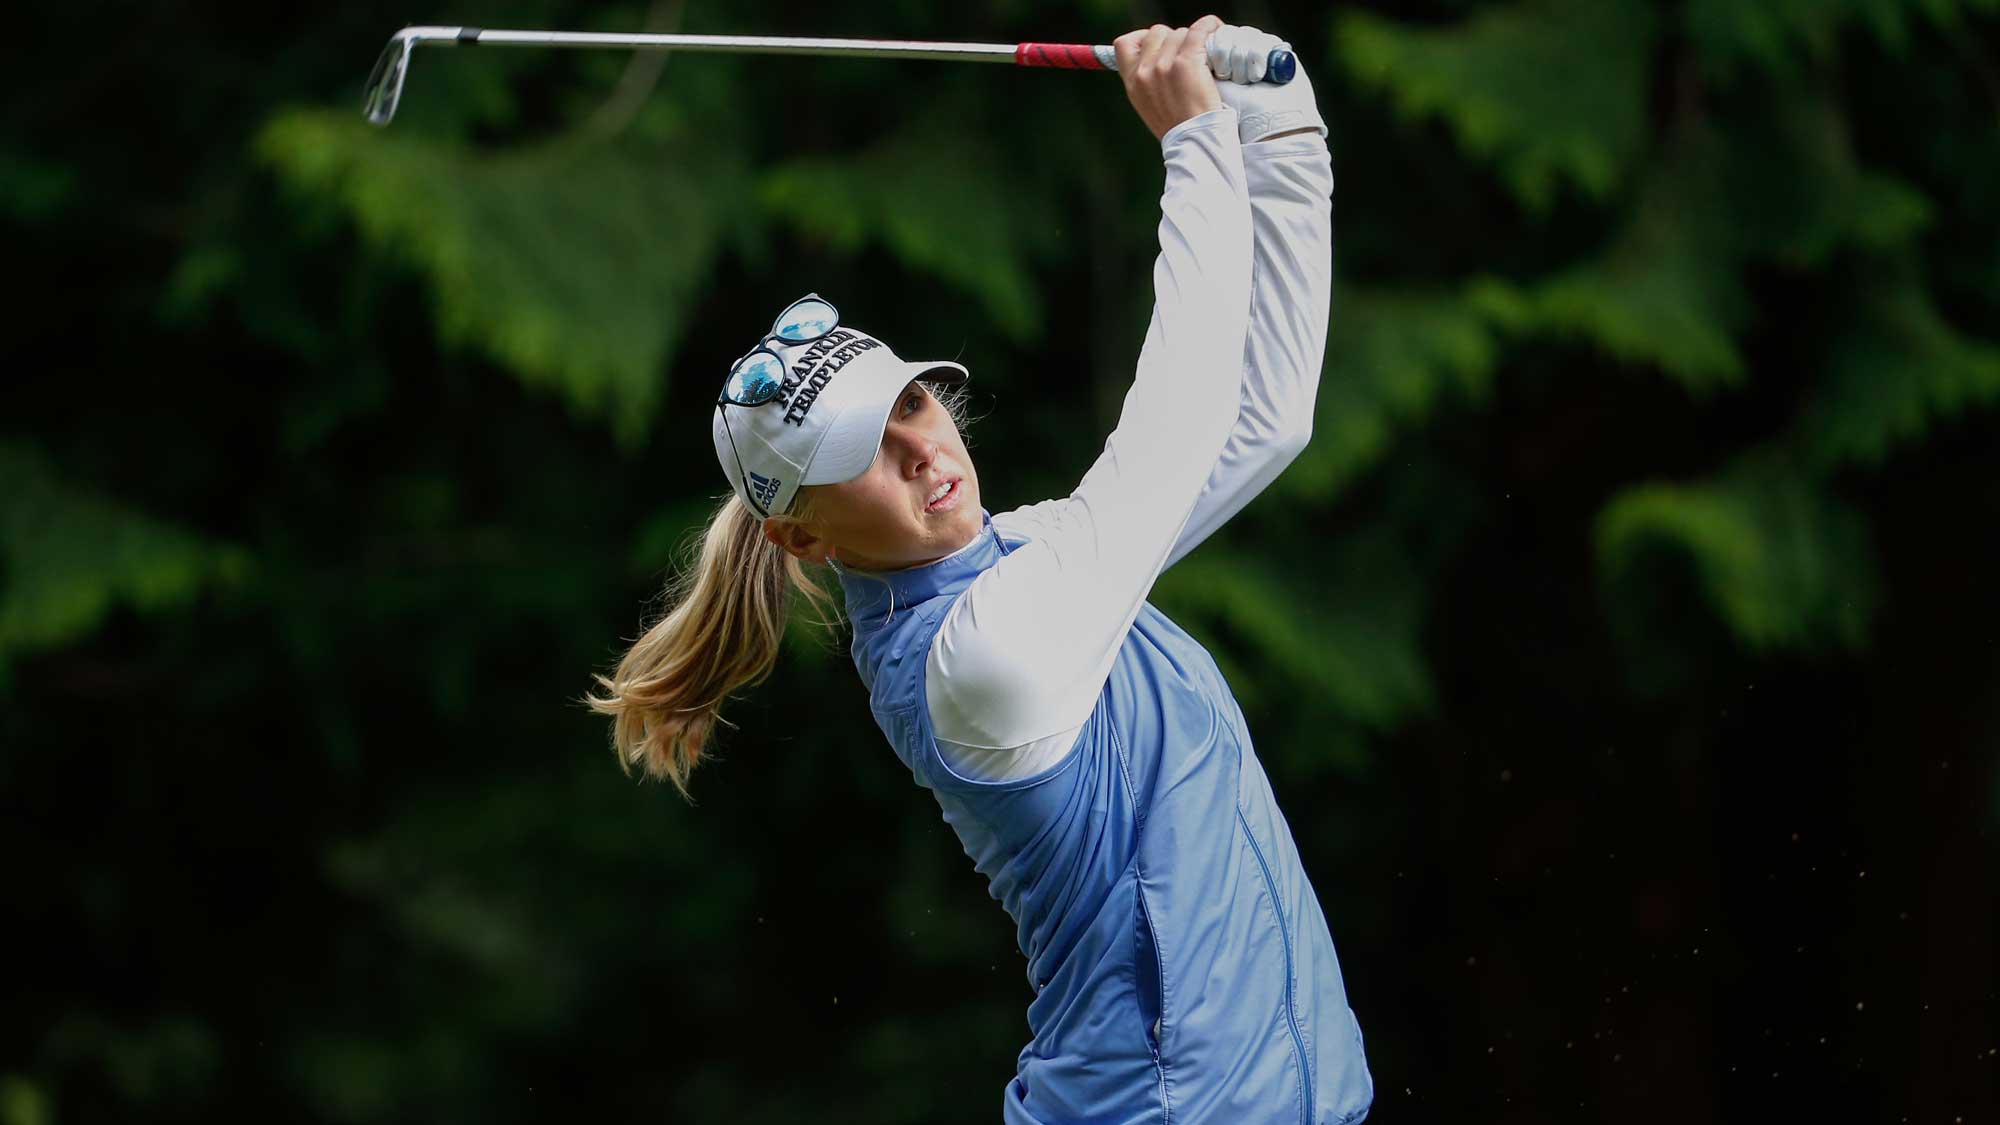 Jessica Korda hits a tee shot on the 13th tee during the second round of the KPMG Women's PGA Championship